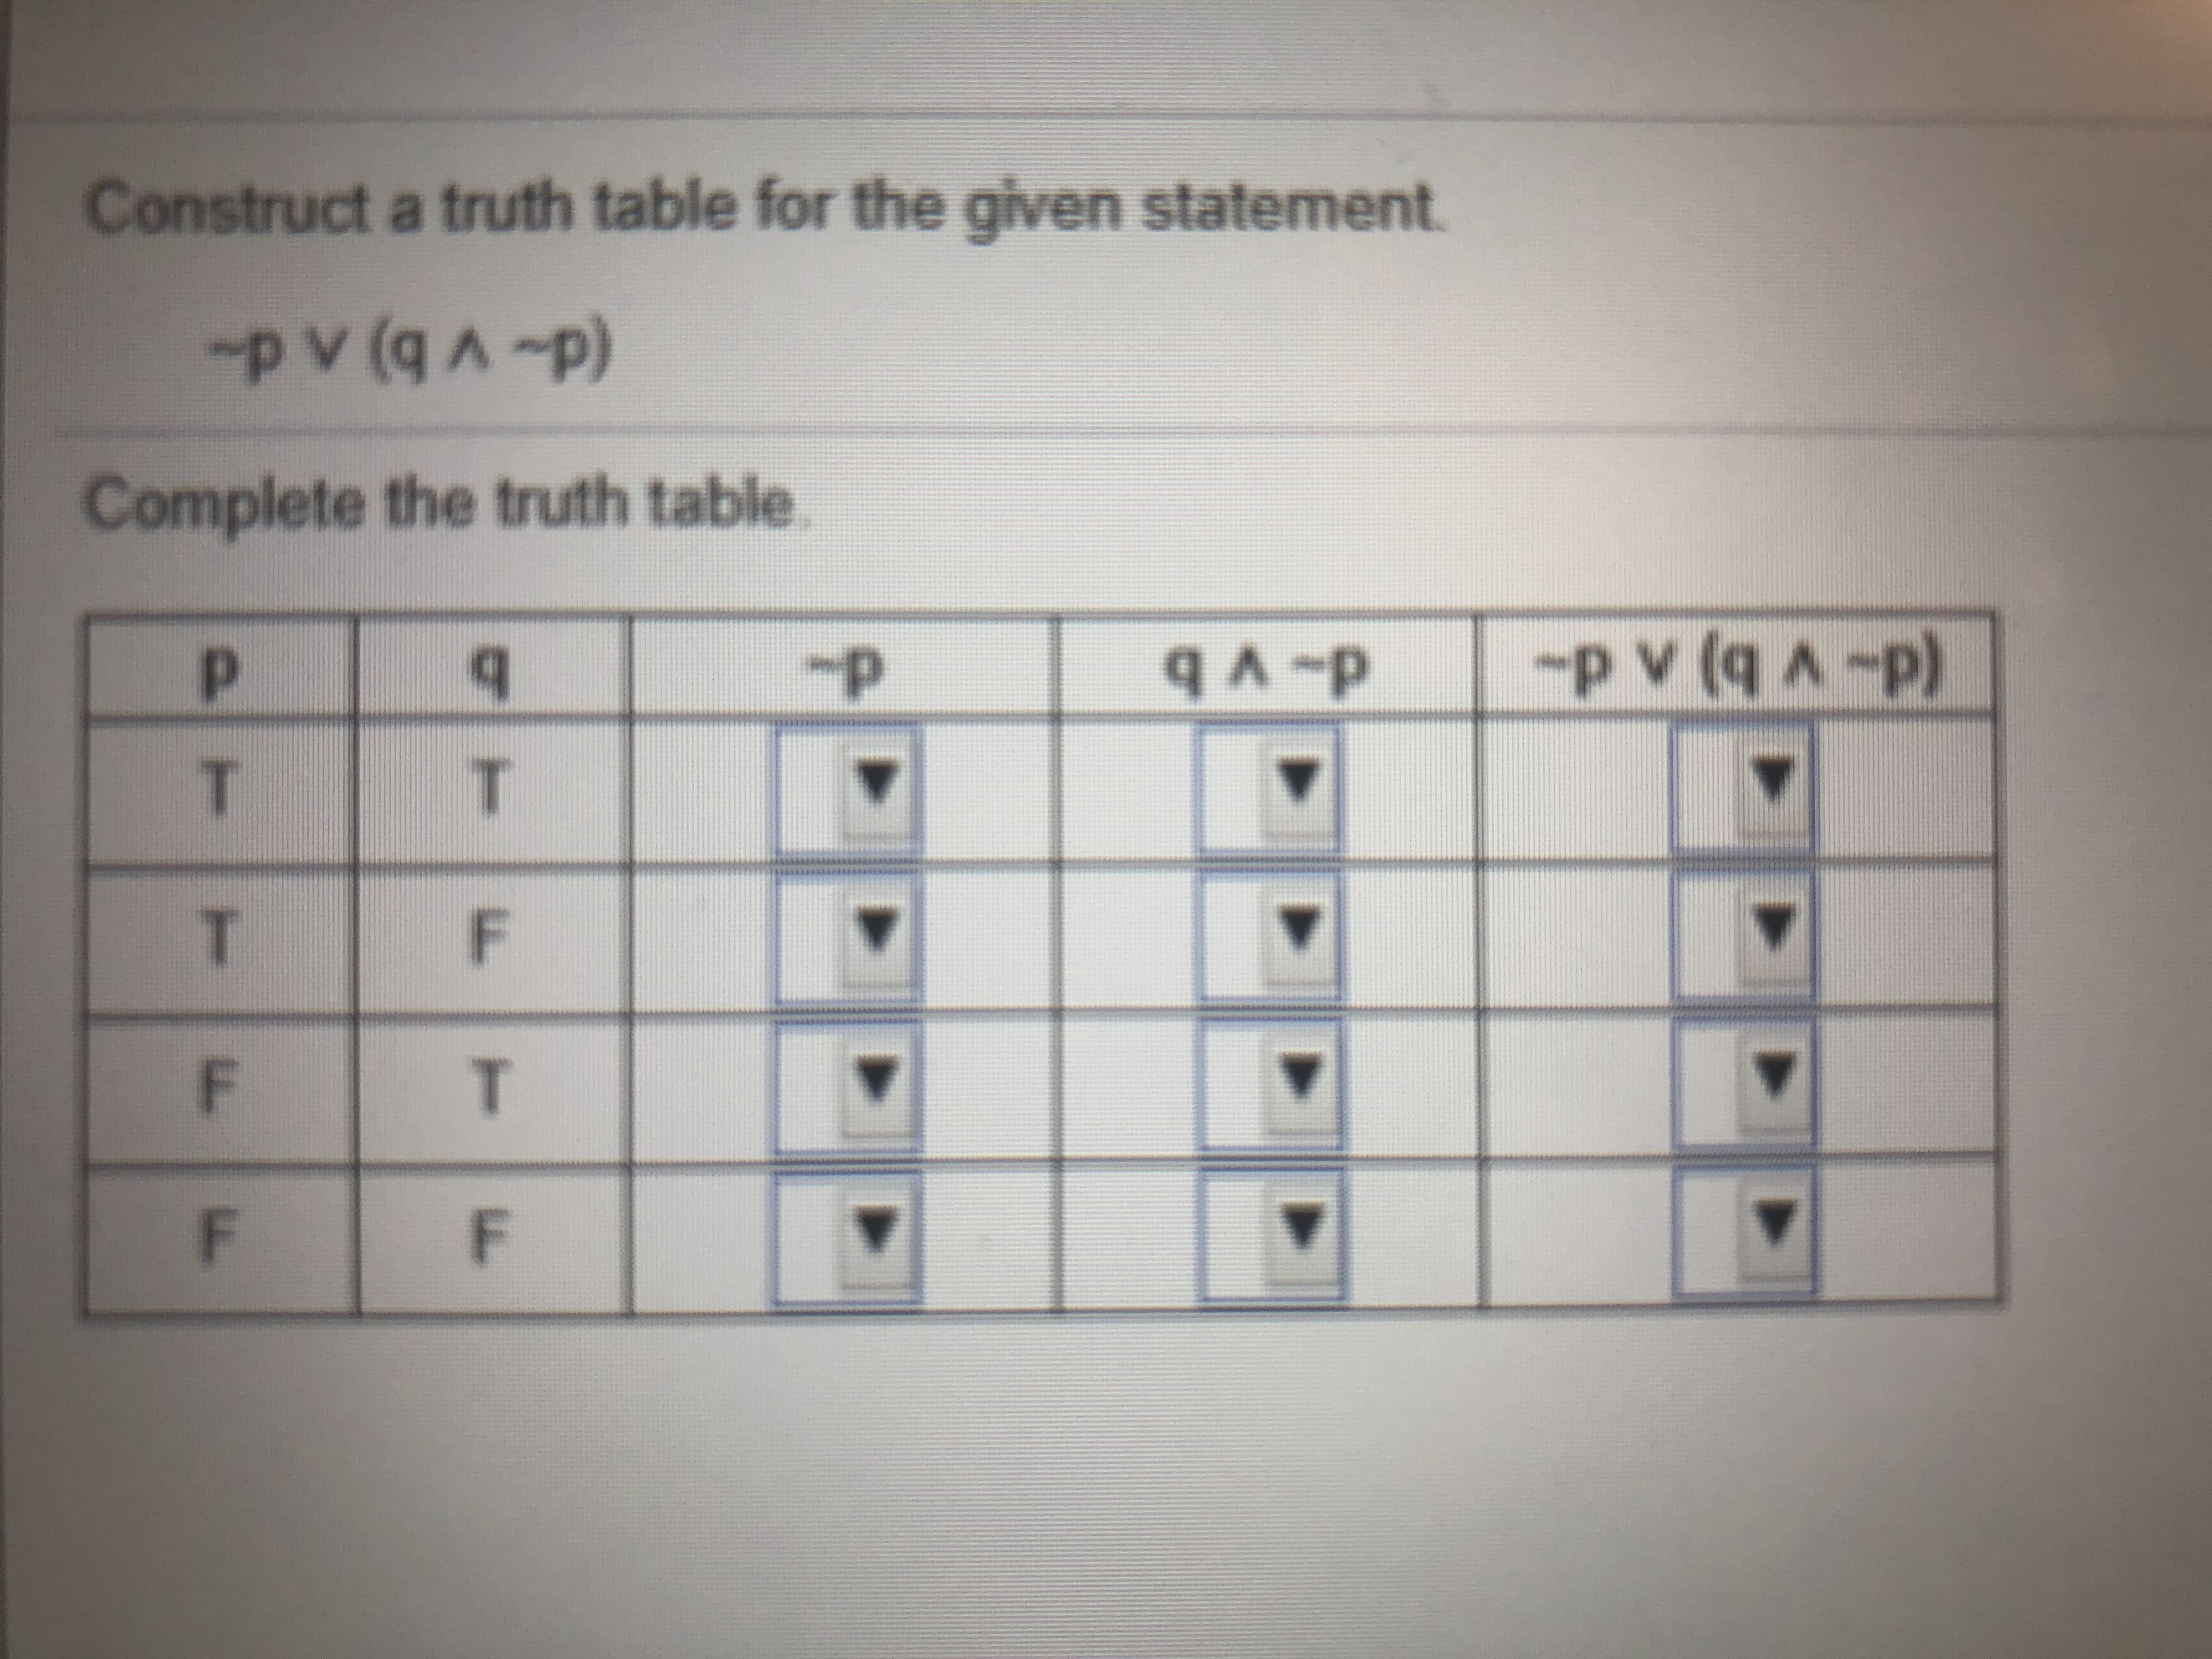 Construct a truth table for the given statement.
-pv (g)
